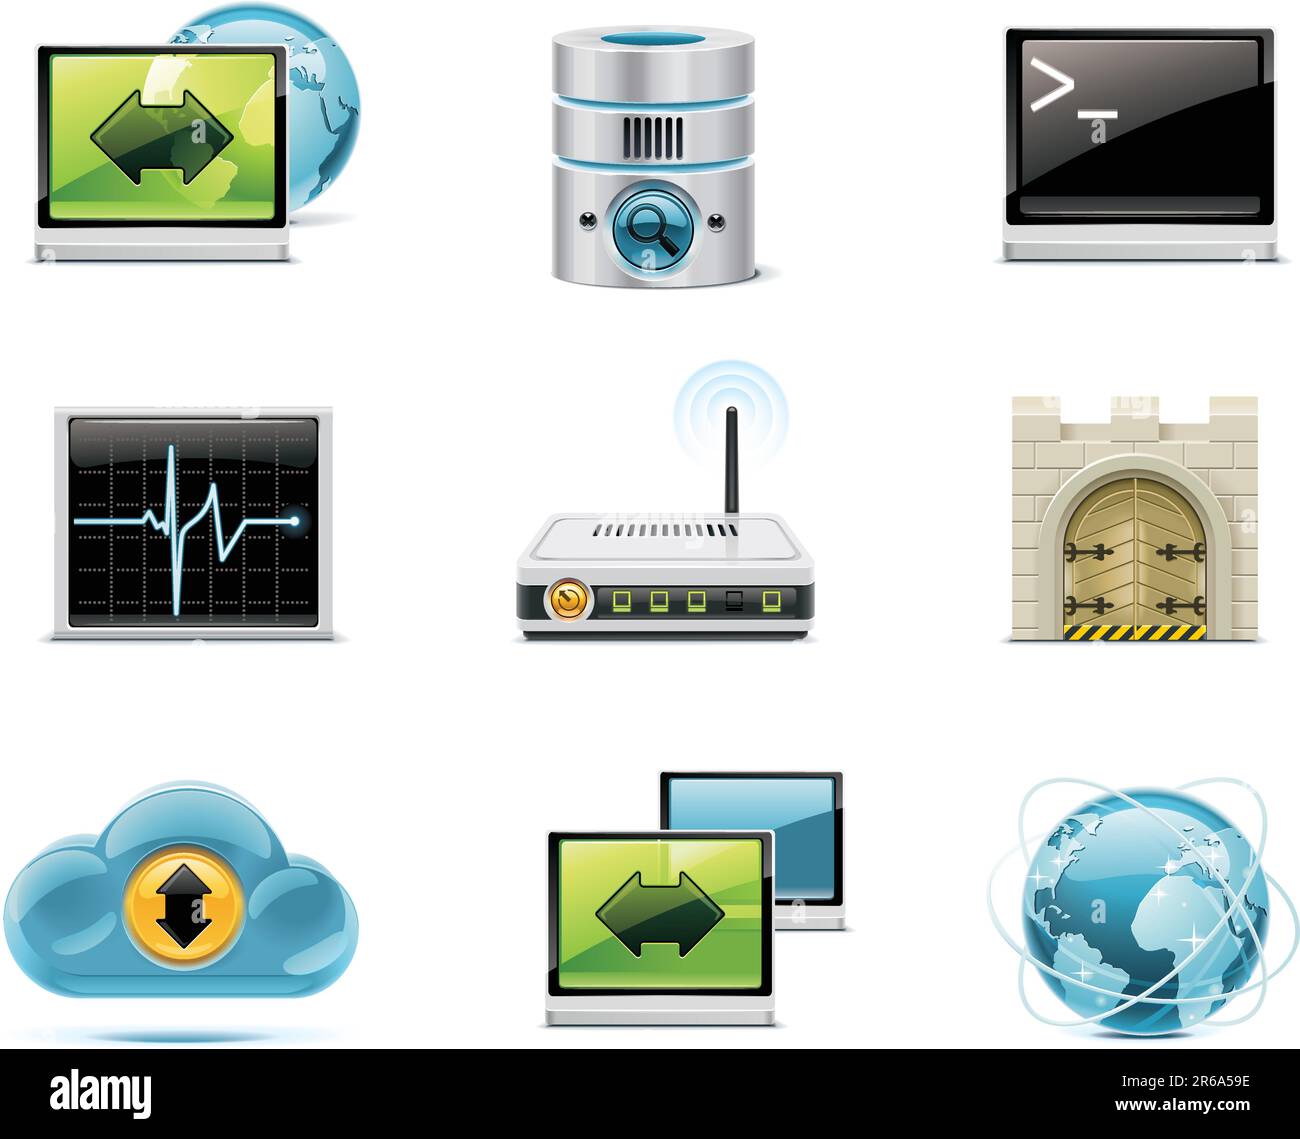 Set of the computer networking icons Stock Vector